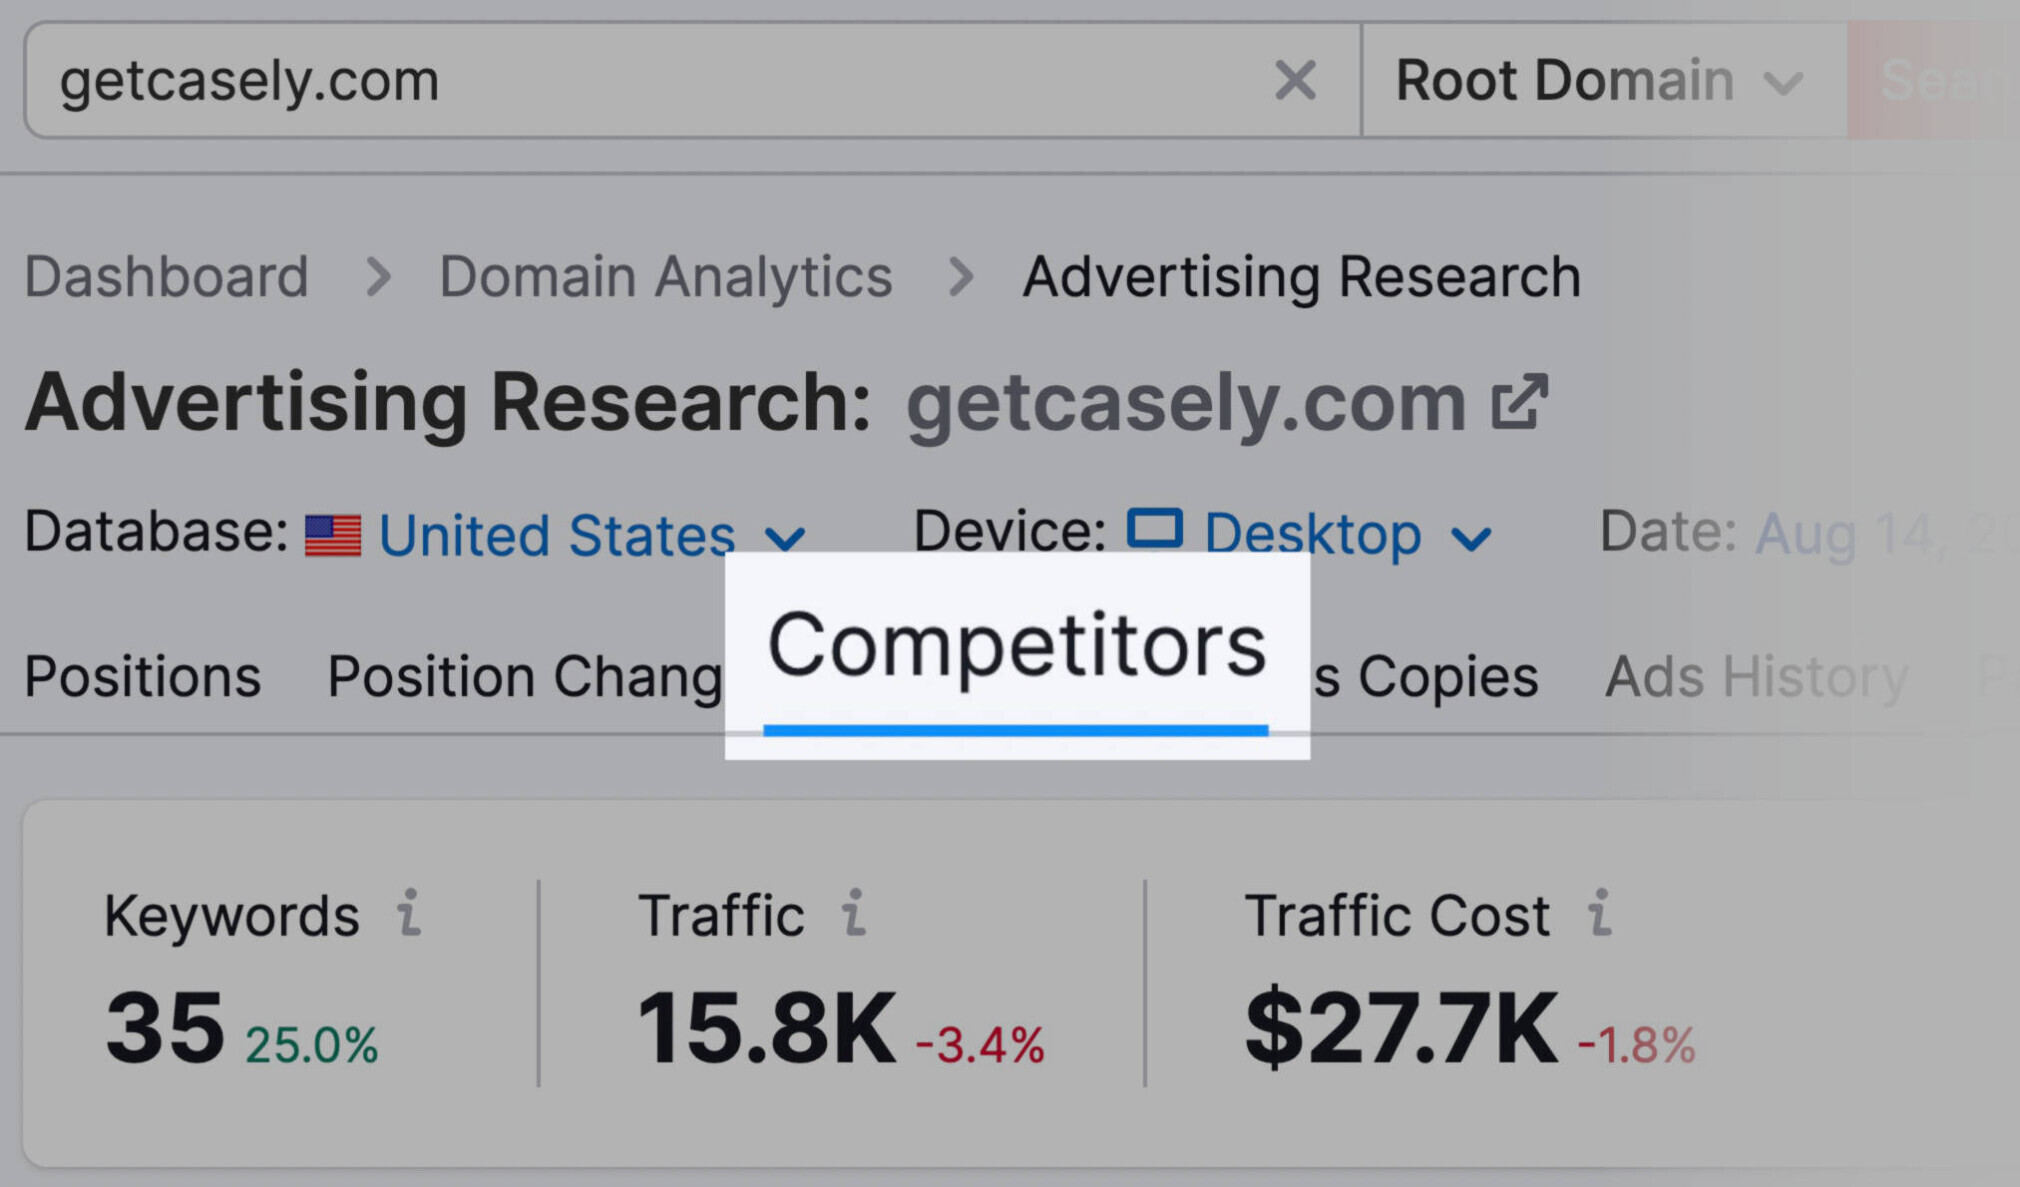 Advertising Research competitors report